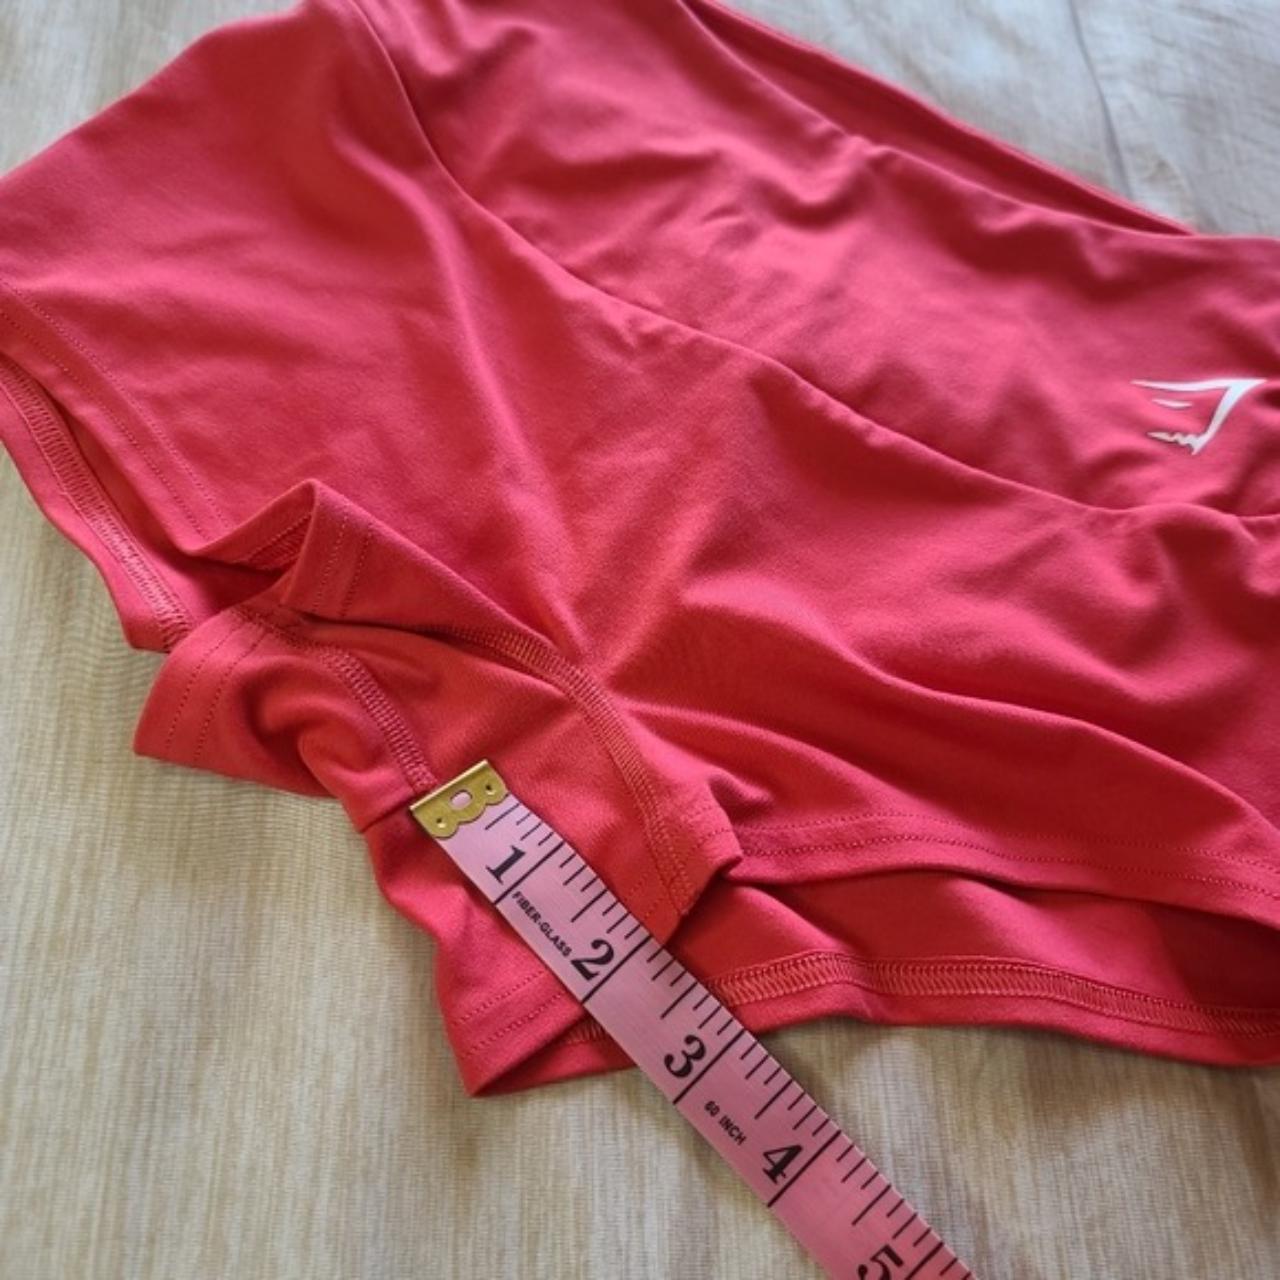 Gymshark pink camo shorts. Size small. Great - Depop